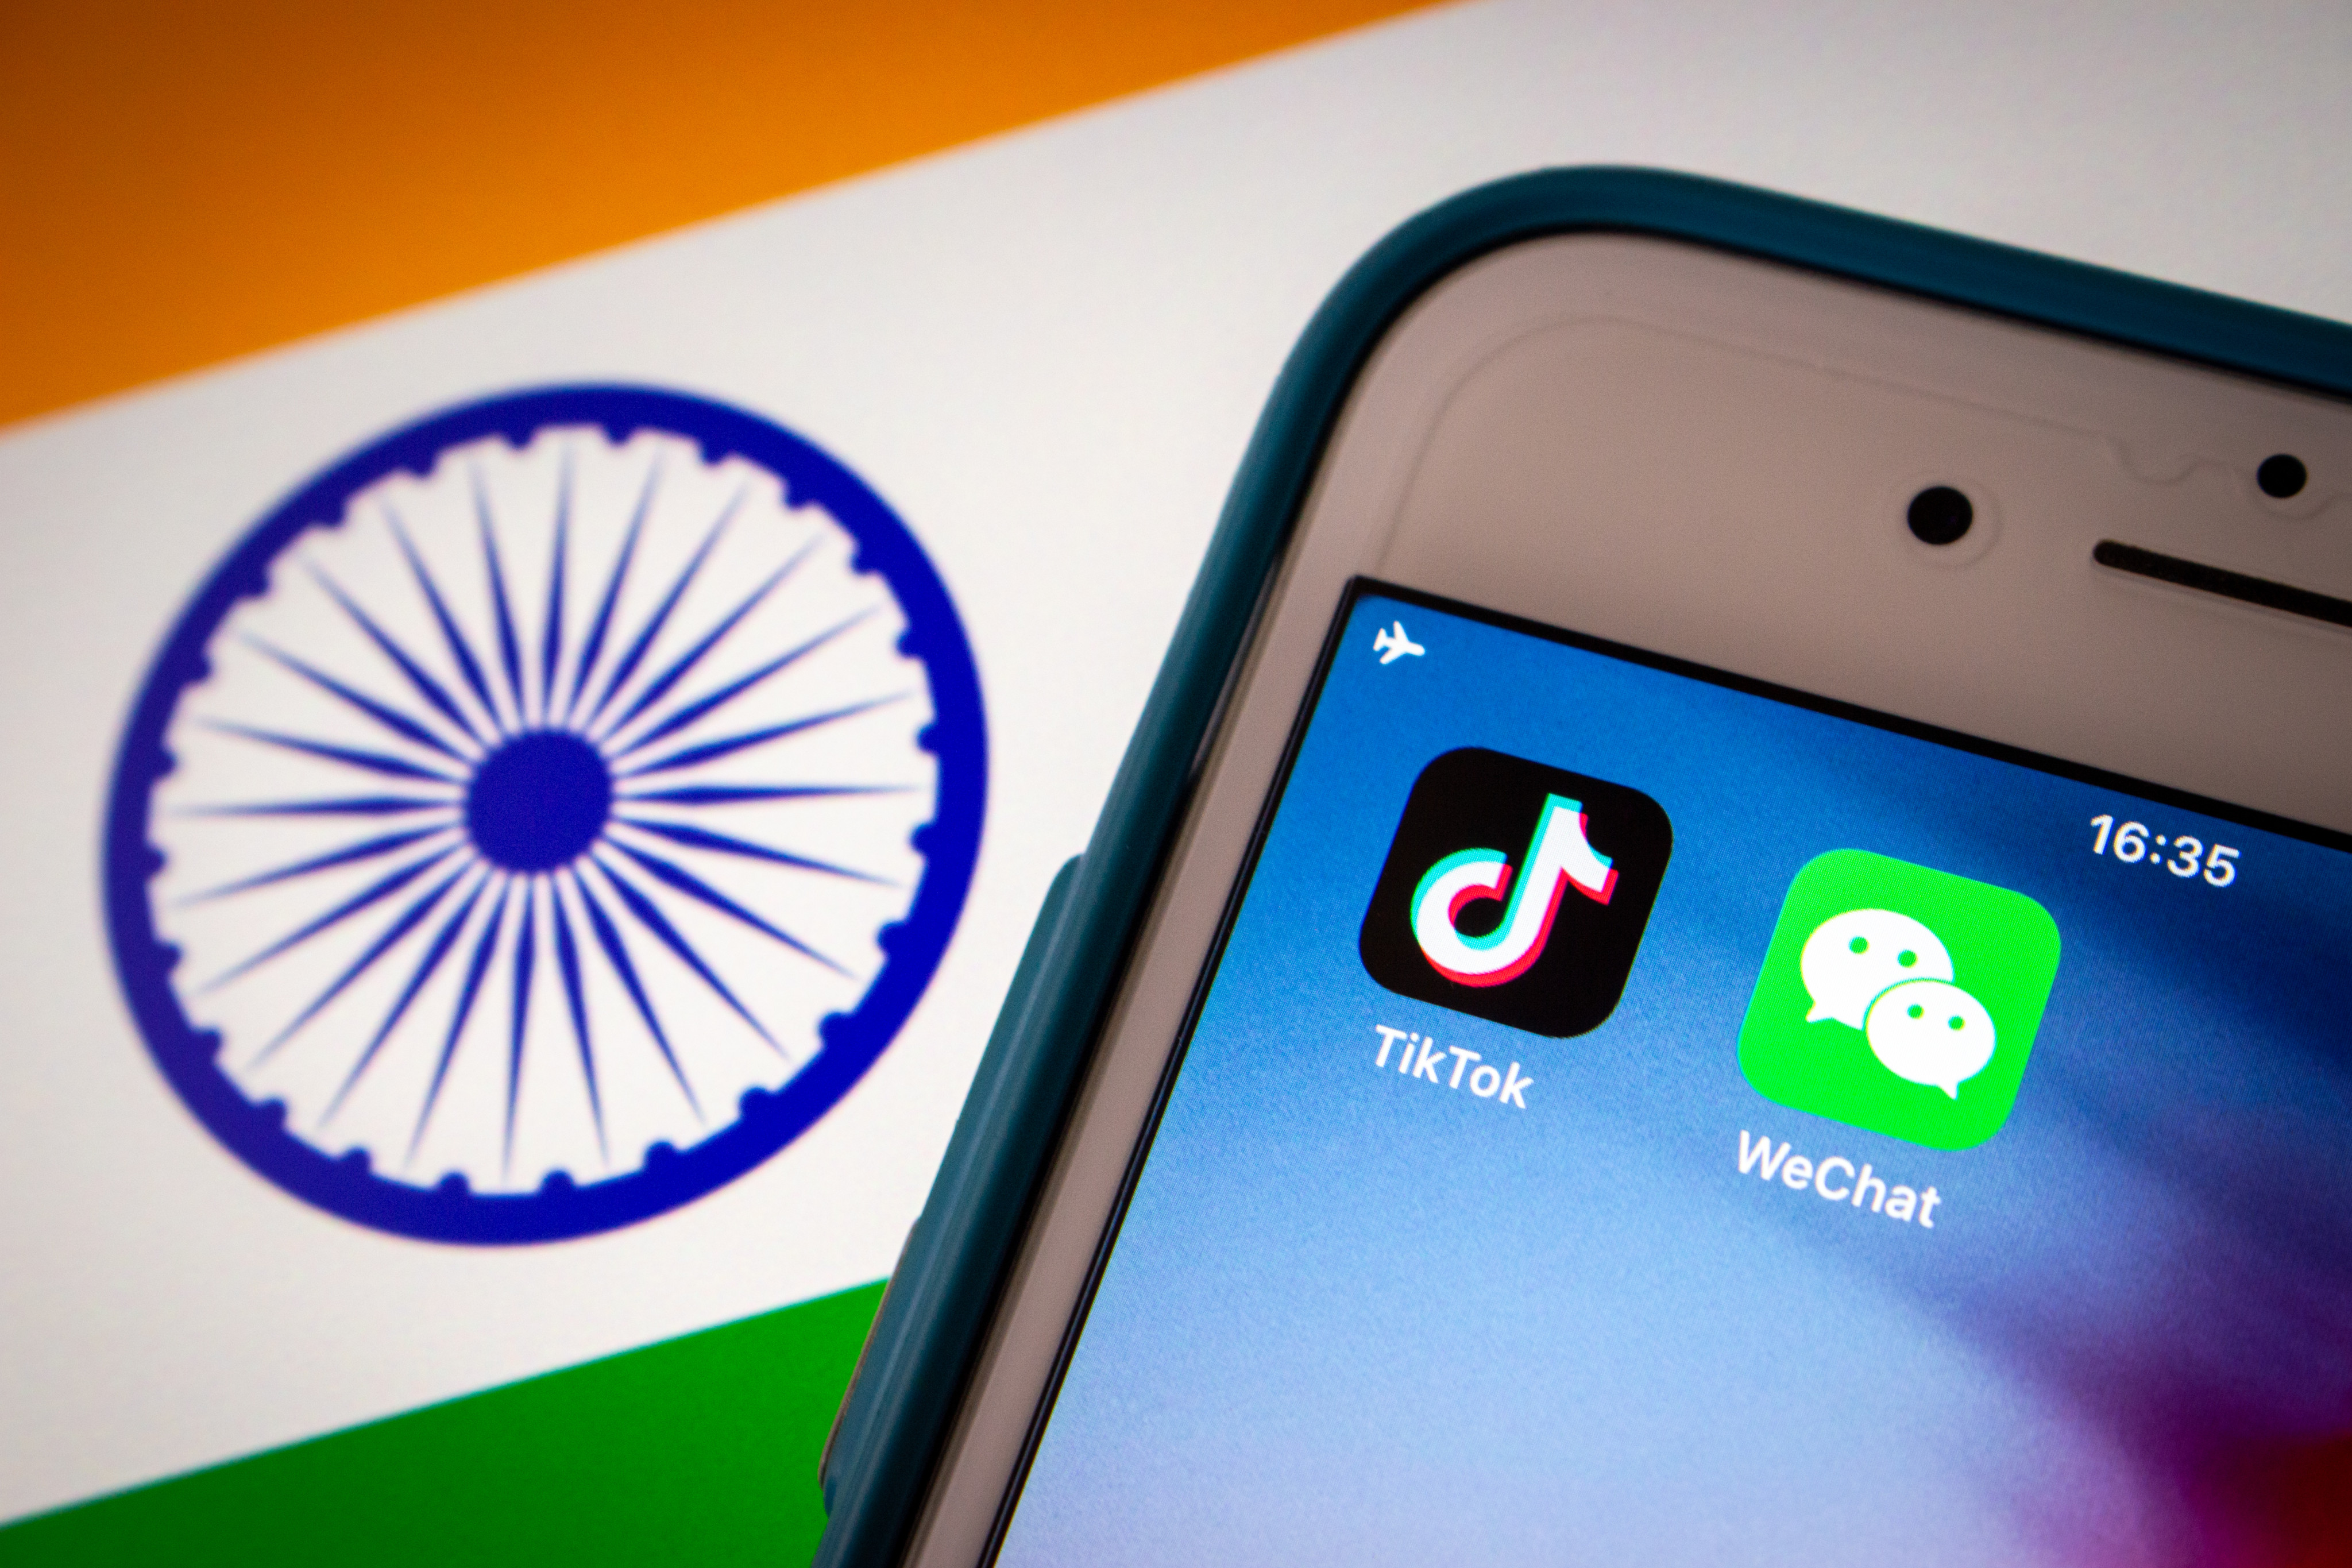 Major Chinese apps that have been blacklisted in India include those of ByteDance, Tencent Holdings, NetEase and Alibaba Group Holding. Photo: Shutterstock